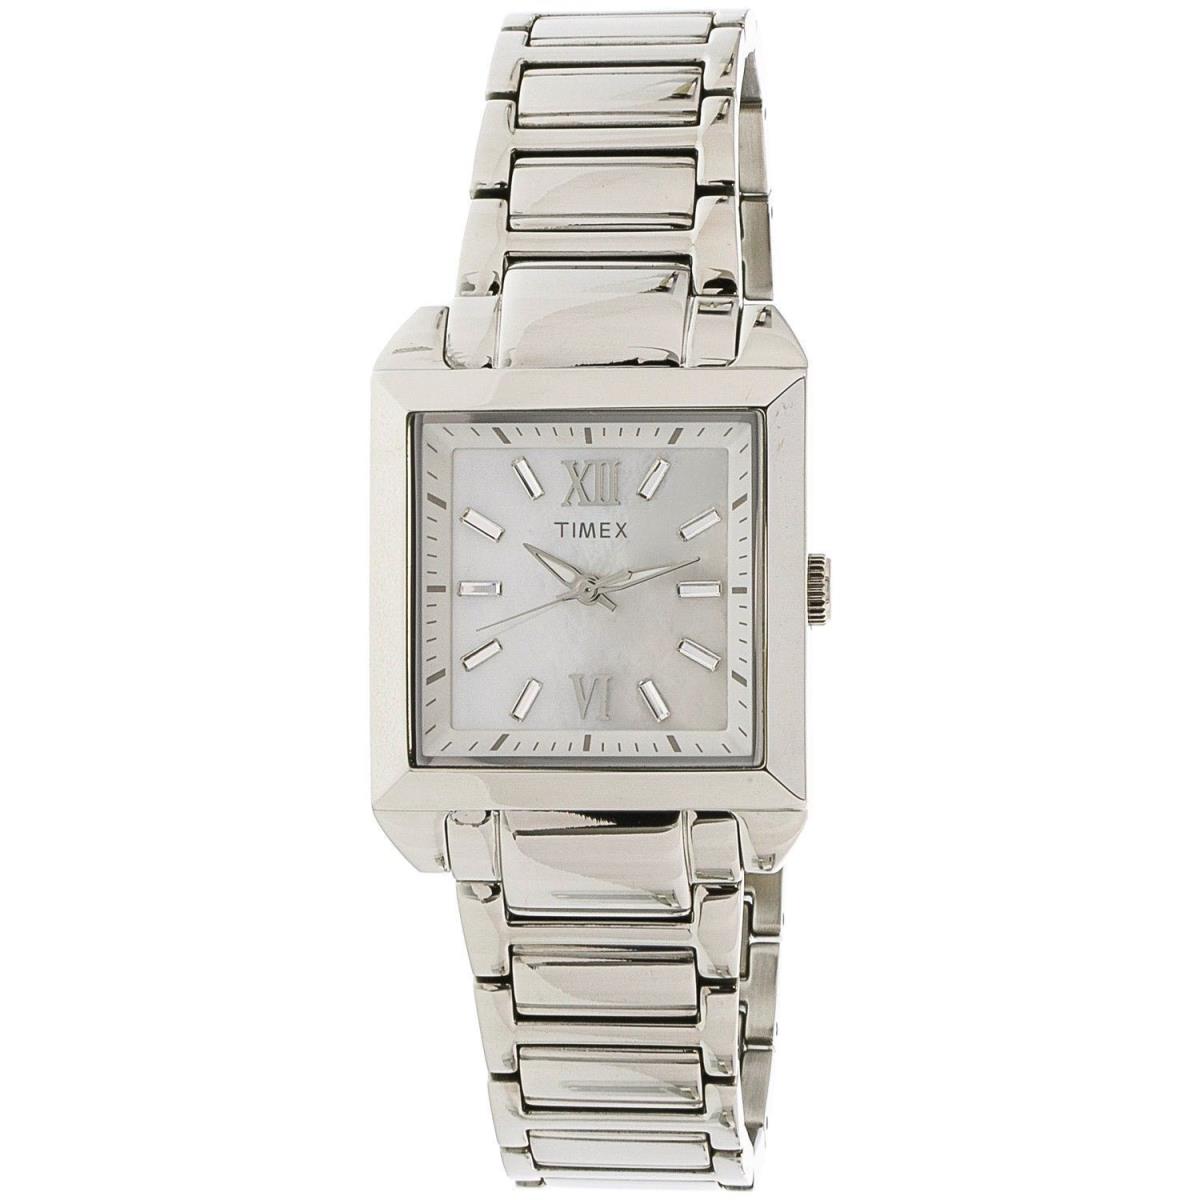 Timex Women`s Style Premium T2P404 Silver Stainless-steel Quartz Fashion Watch - Dial: Silver, Band: Silver